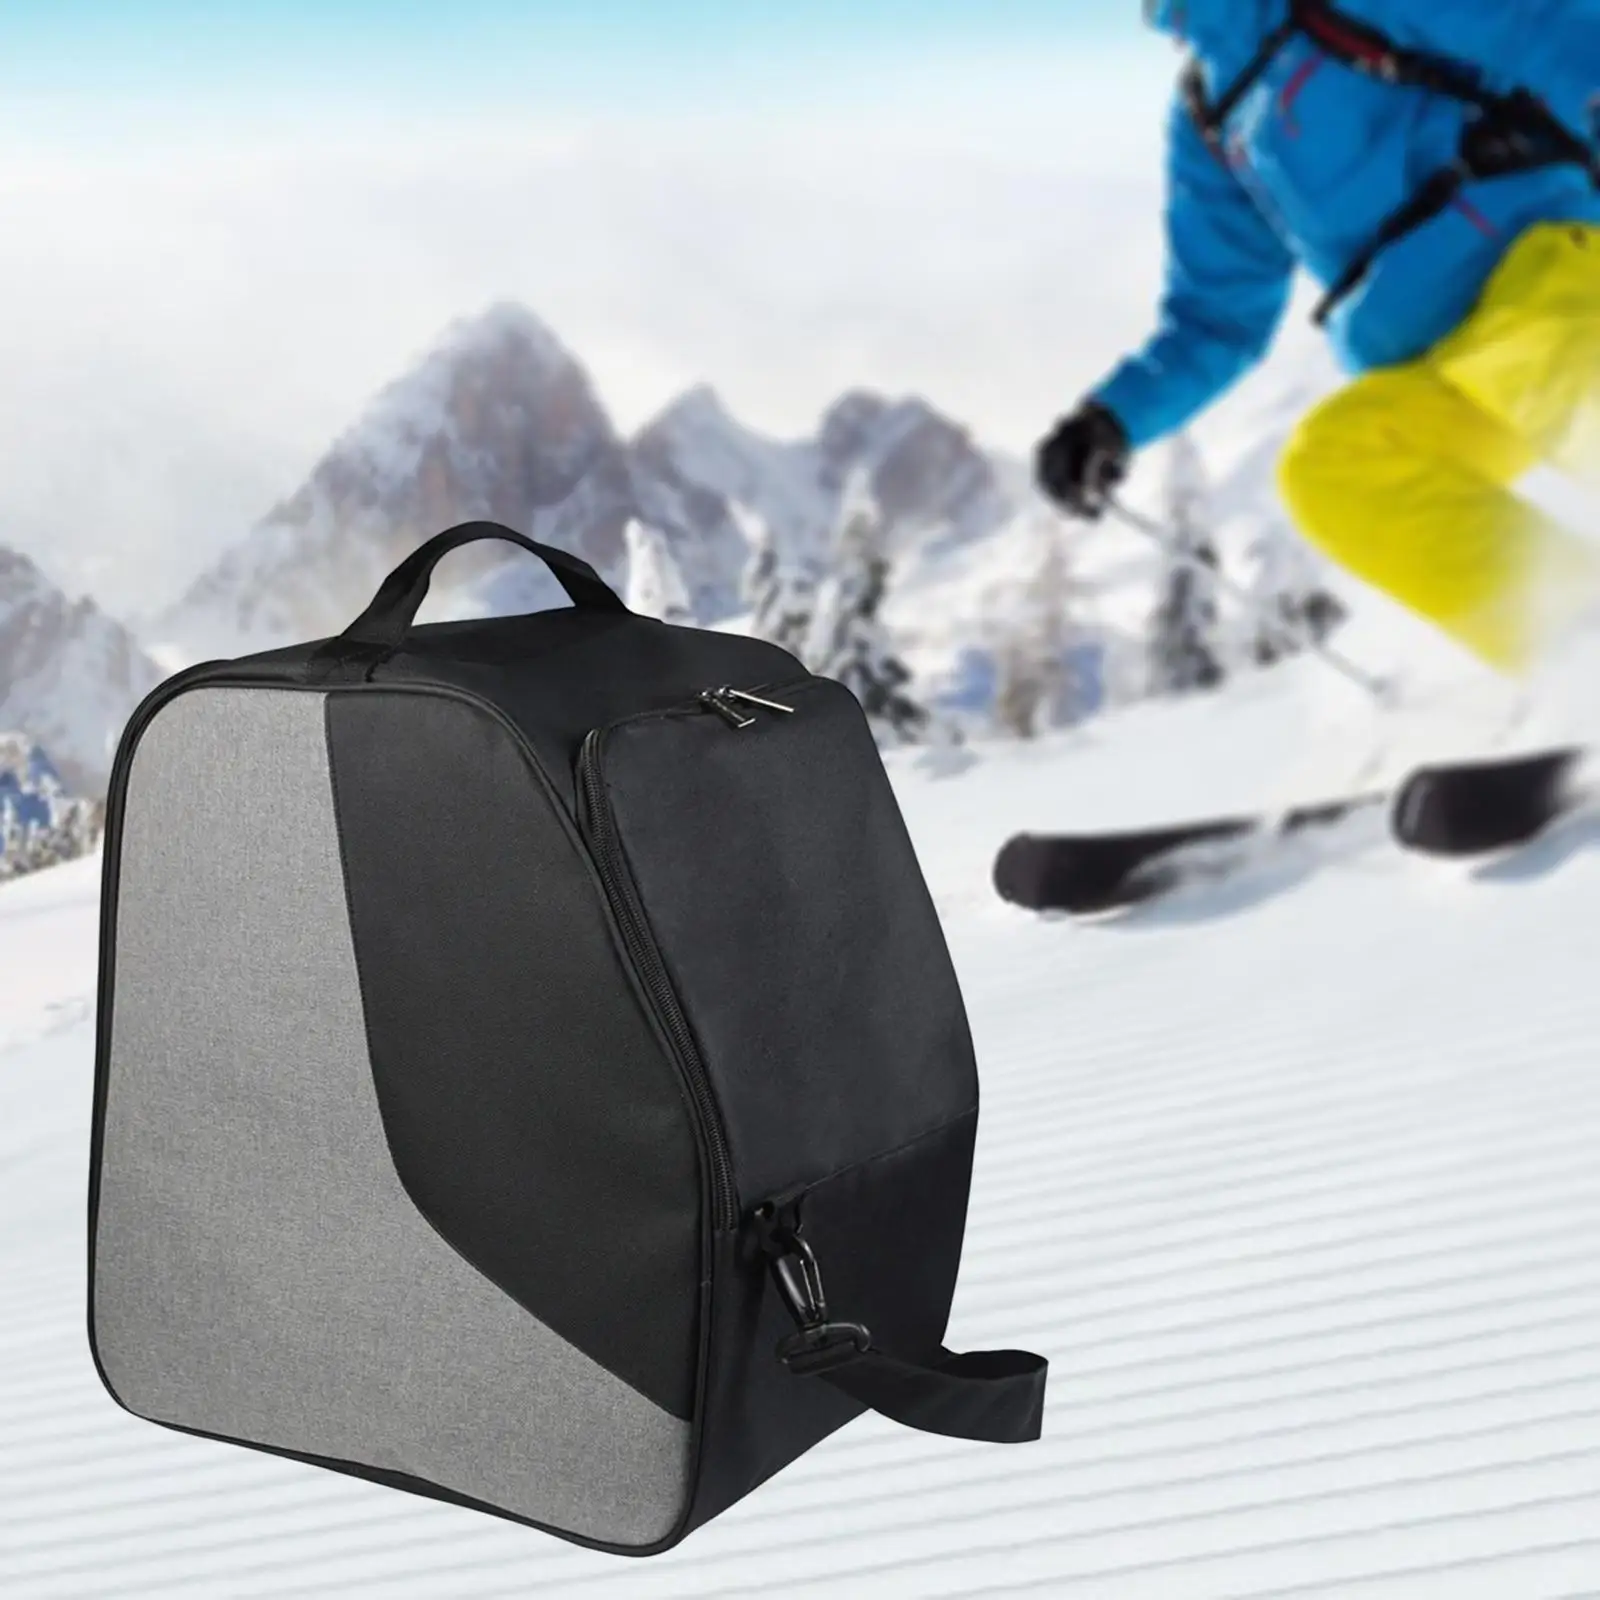 Durable Ski Boot Bag Large Capacity Carrying Storage Bag Compartments Lightweight Backpack for Gloves Goggles Snowboard Travel